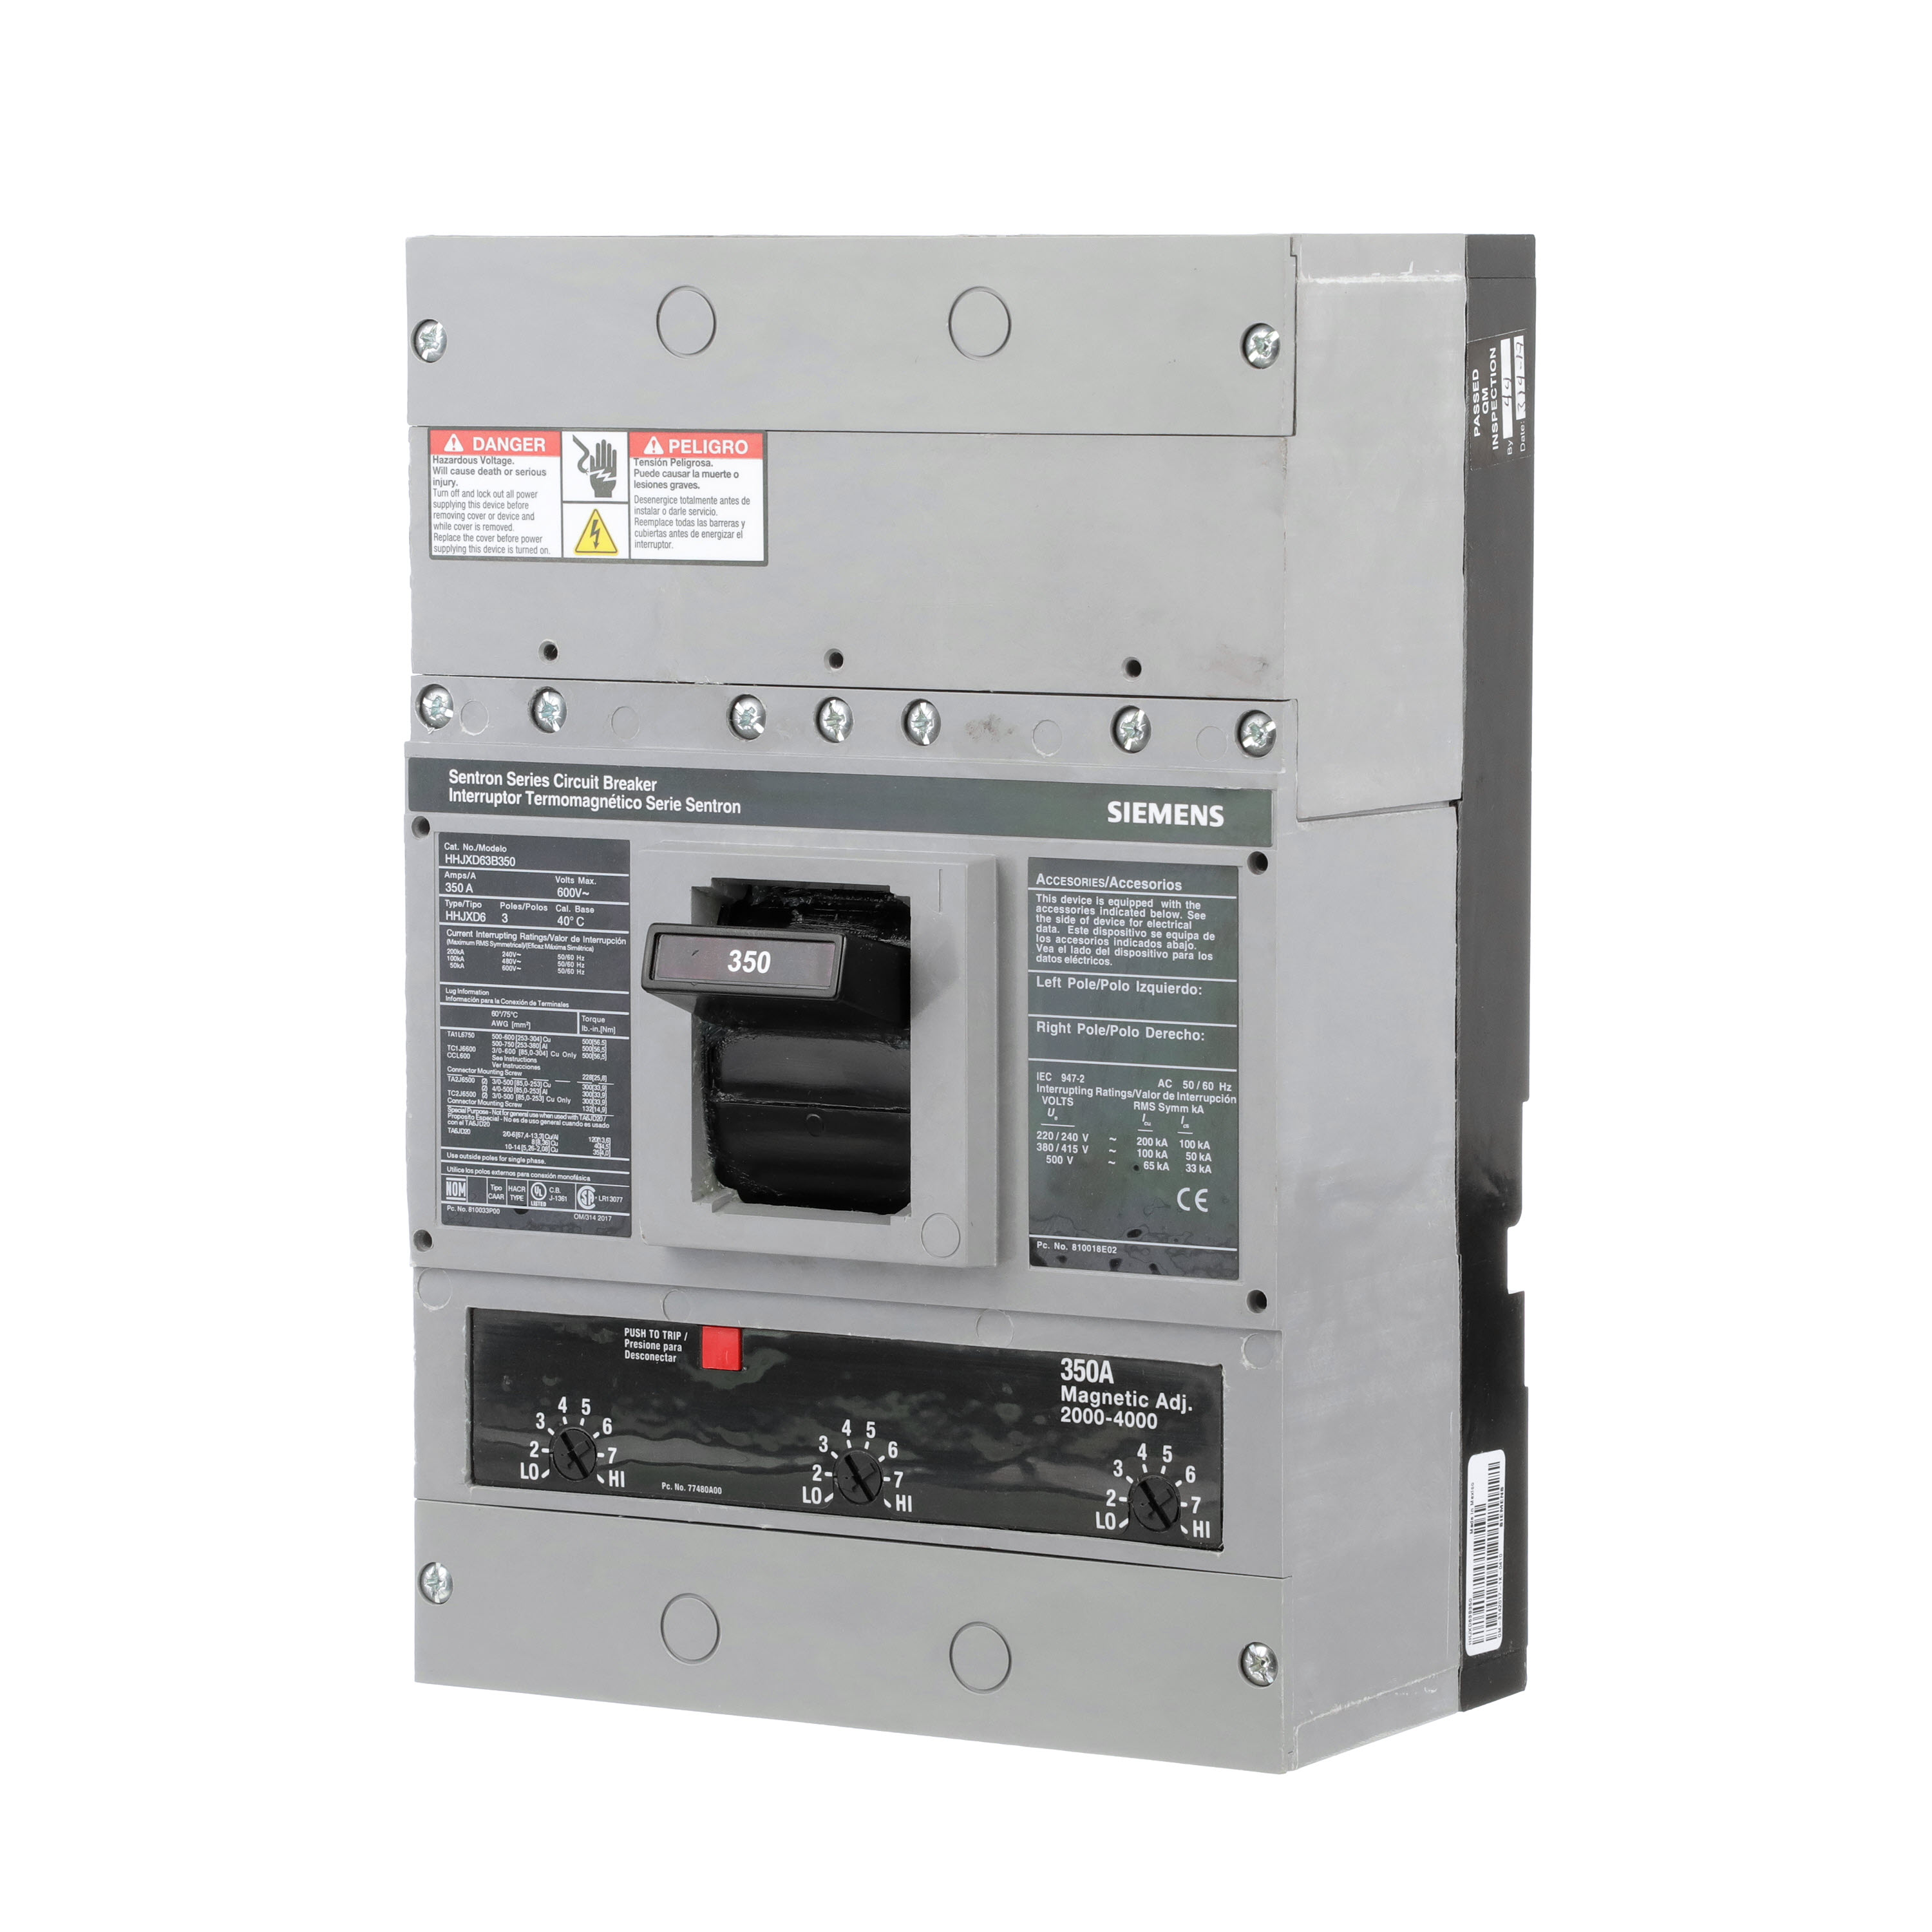 SIEMENS LOW VOLTAGE SENTRON MOLDED CASE CIRCUIT BREAKER WITH THERMAL - MAGNETICTRIP UNIT. ASSEMBLED STANDARD 40 DEG C BREAKER JD FRAME WITH EXTRA HIGH BREAKING CAPACITY. 350A 3-POLE (50KAIC AT 600V) (100KAIC AT 480V). NON-INTERCHANGEABLE TRIP UNIT. SPECIAL FEATURES NO LUGS INSTALLED. DIMENSIONS (W x H x D) IN 7.50 x 11.0 x 4.00.